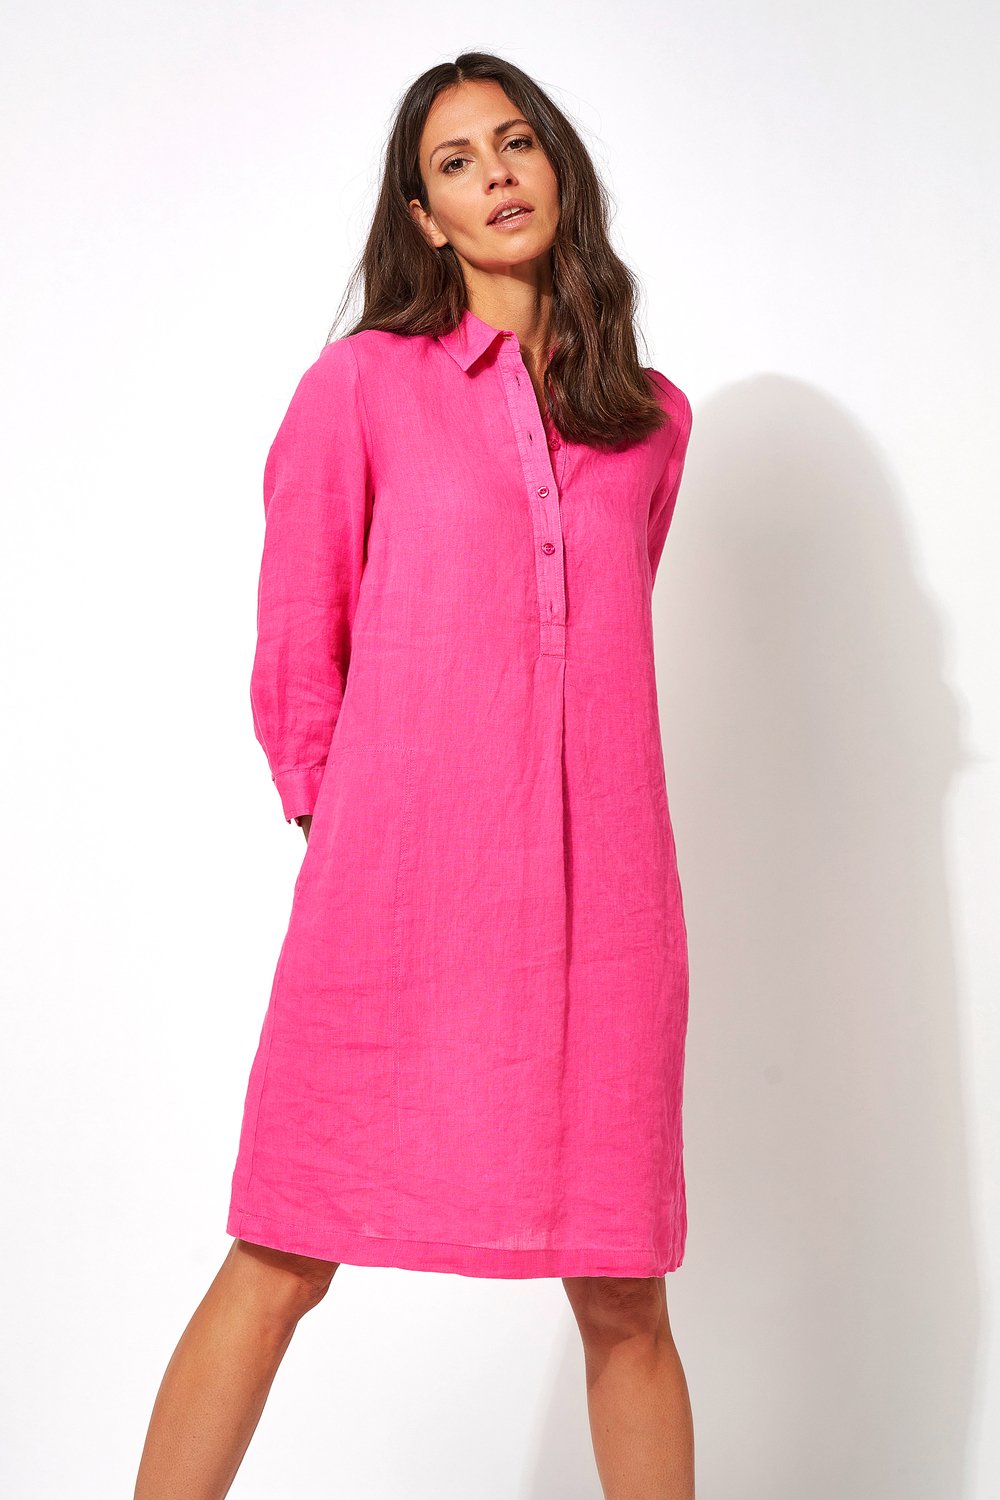 Relaxed linen dress | Style »Aila« pink